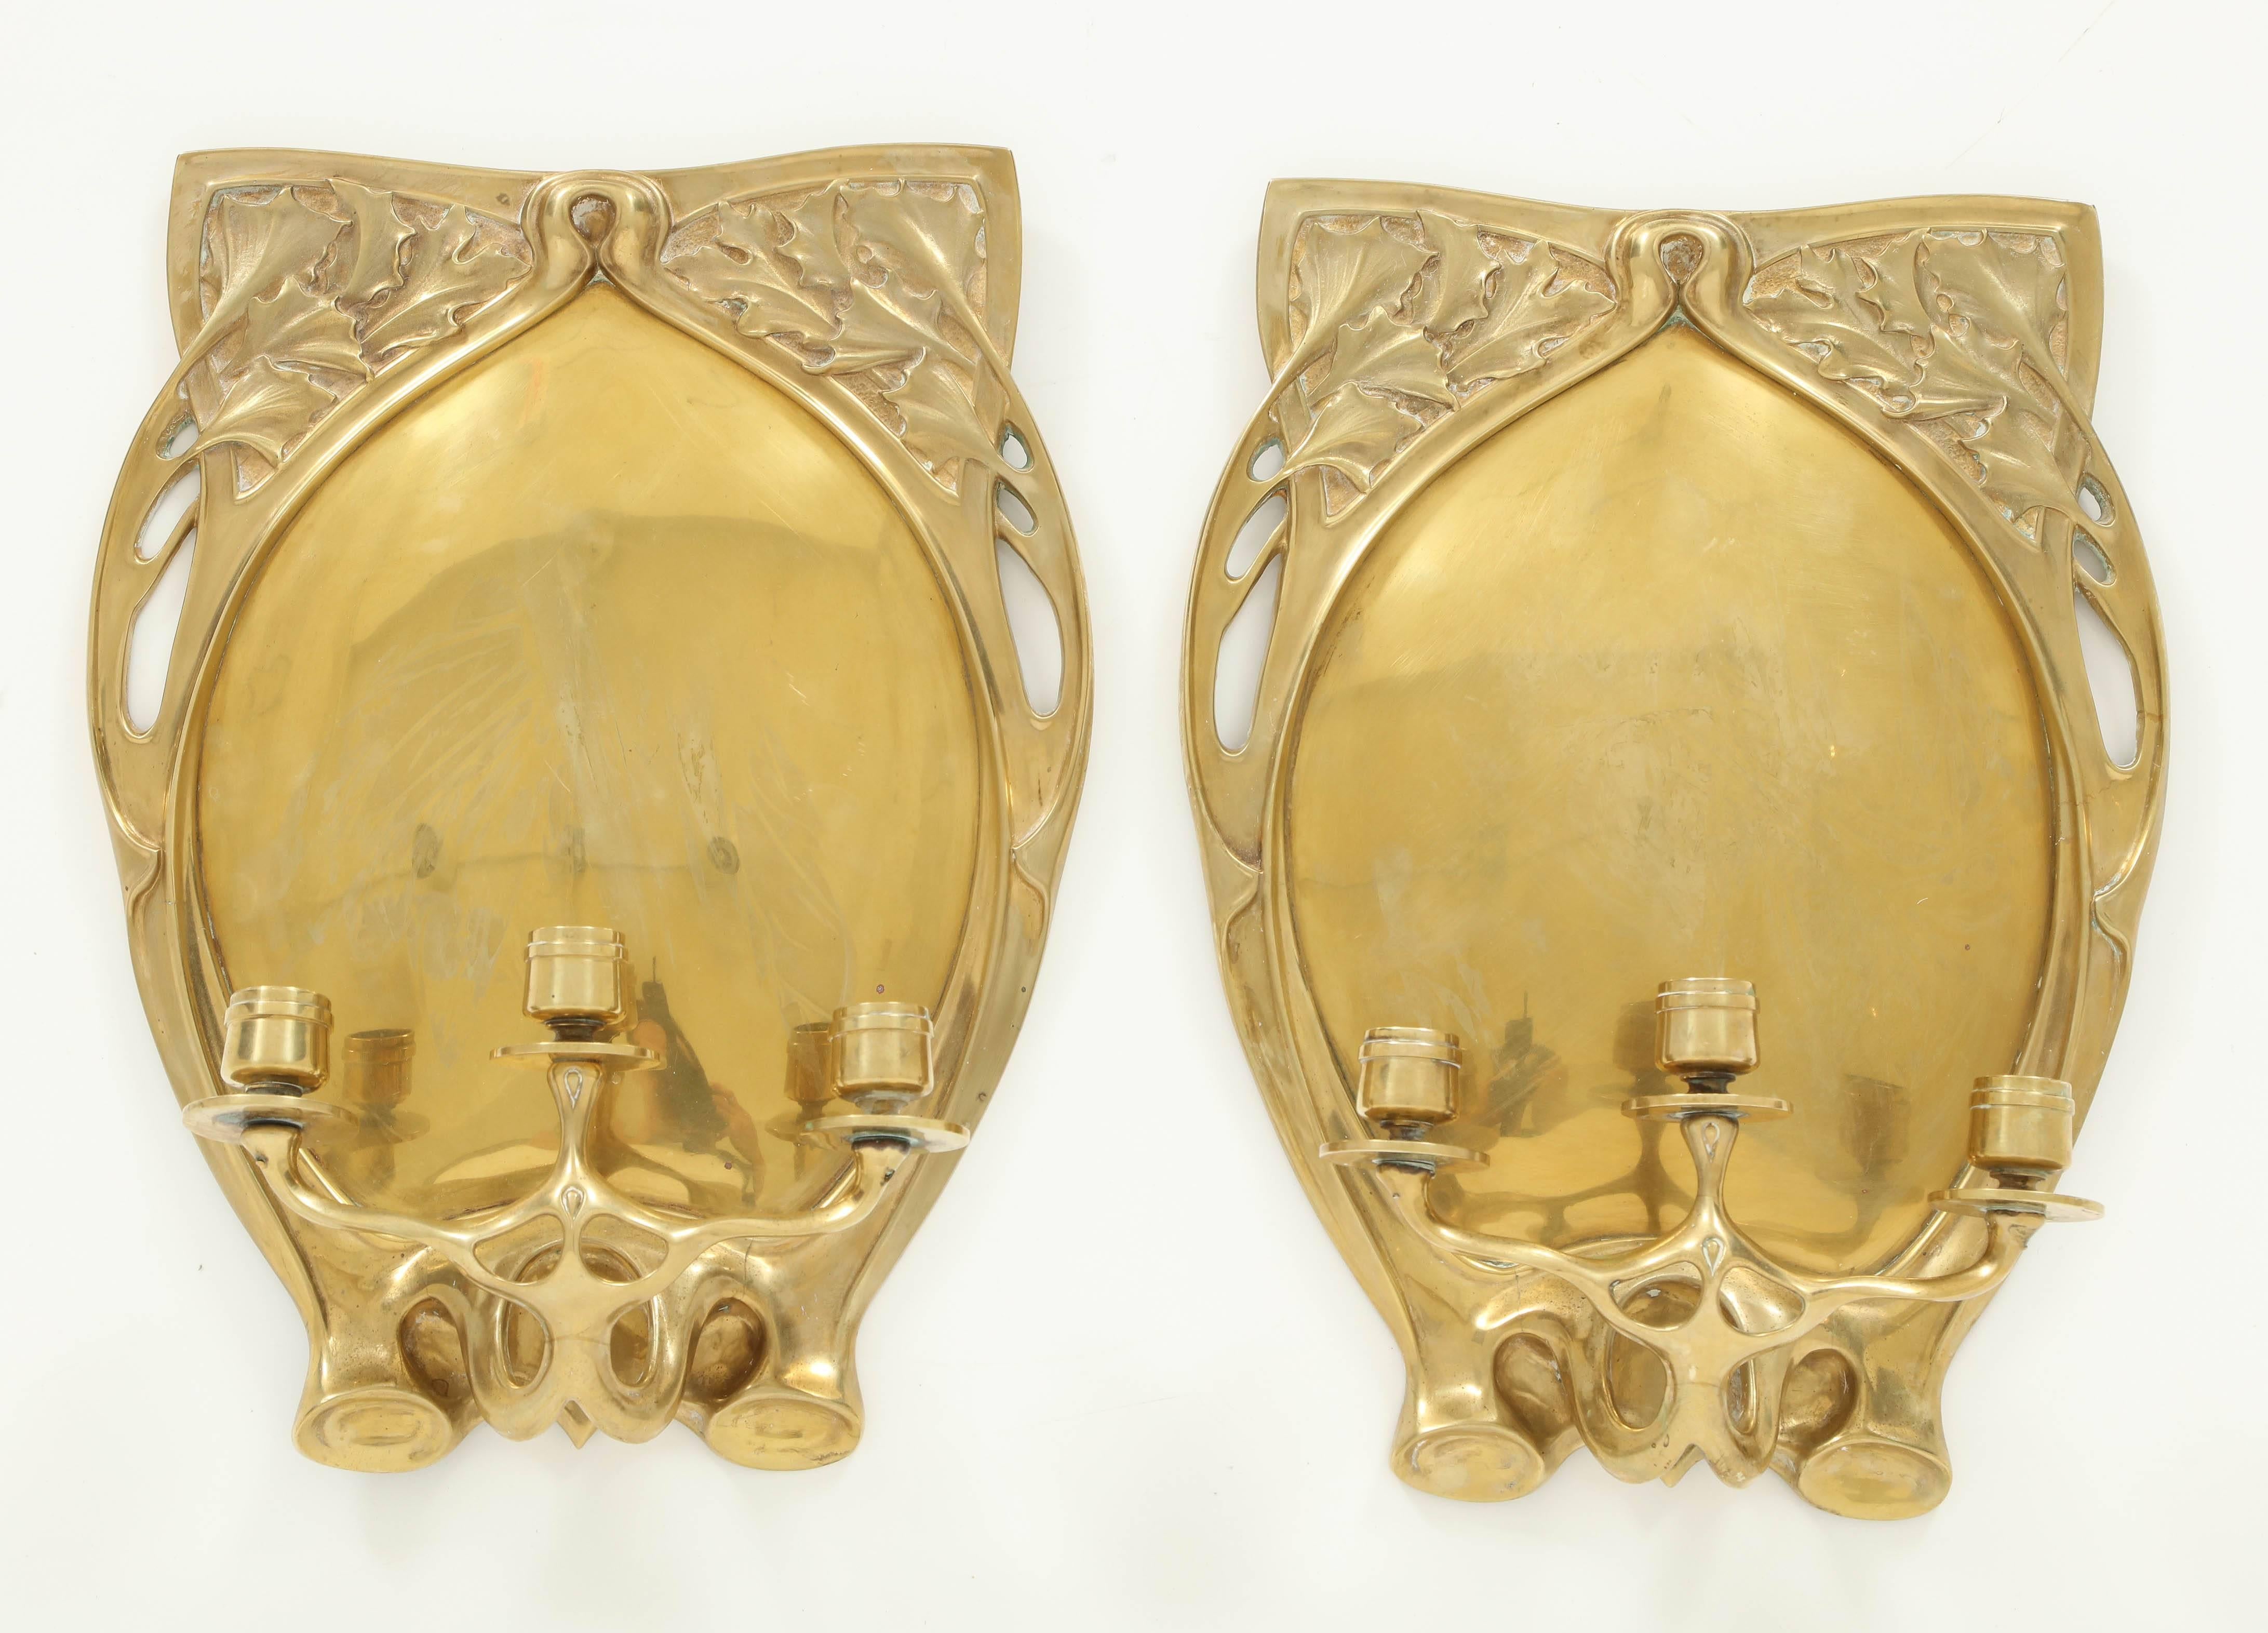 Pair of heavy cast brass three-arm candle sconces with attached hand-forged reflective brass backplate. Continental, probably Belgian or French, circa 1900.